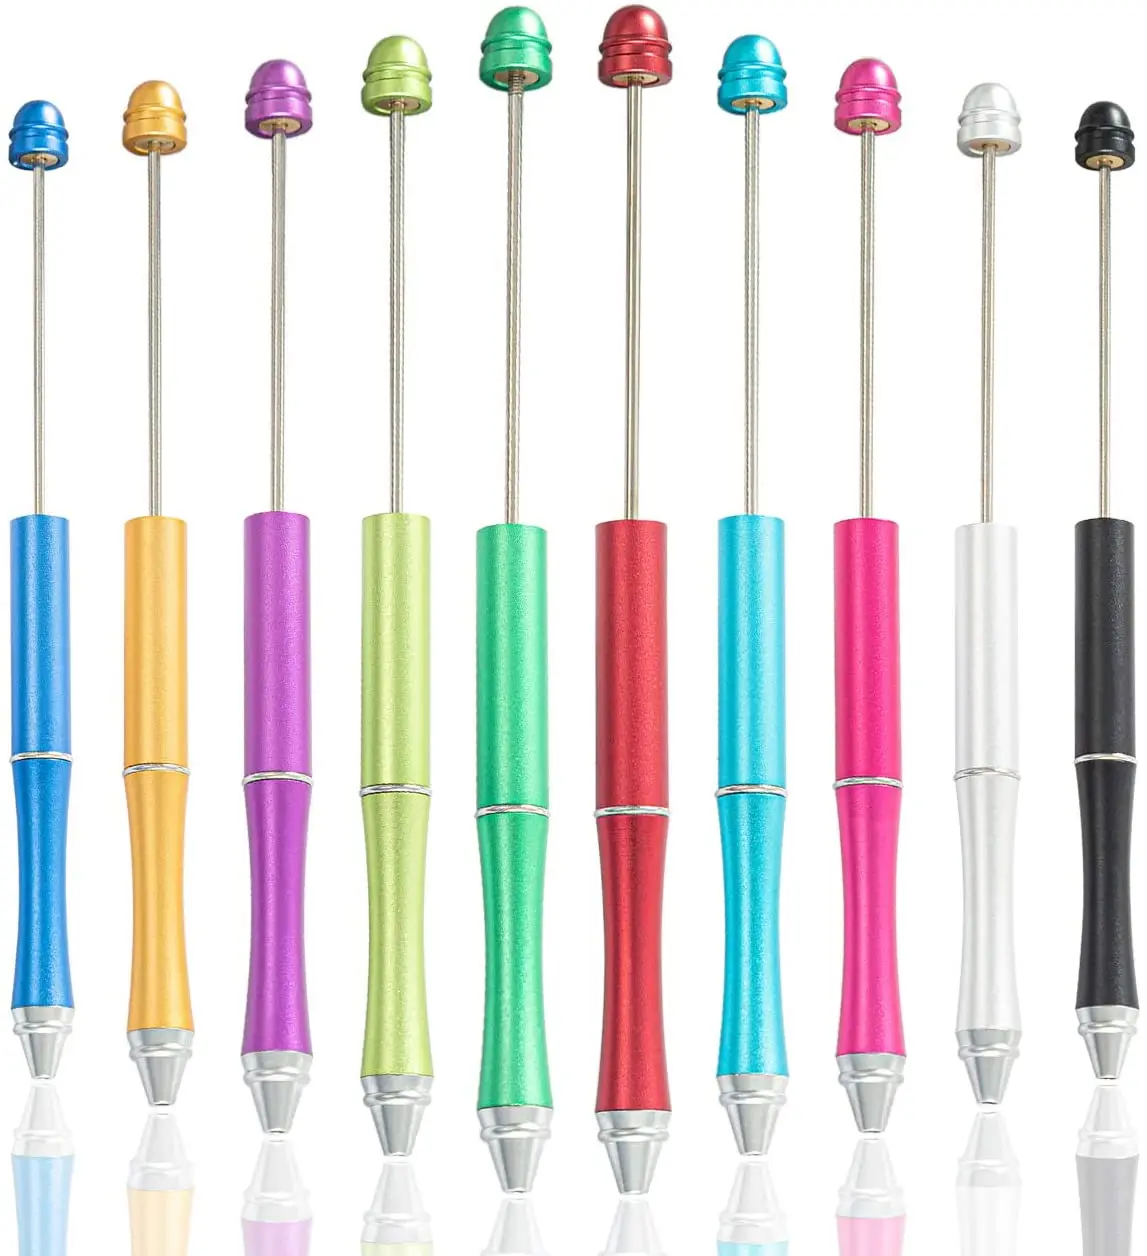 10pcs Metal Ballpoint Pen Beadable Pens Japanese Stationery Bead Pens for Writing School Office Supply Kids Gift Luxury Pen 10 colors cartoon ballpoint pen cute animal school office supply stationery papelaria escolar multicolored pens colorful refill